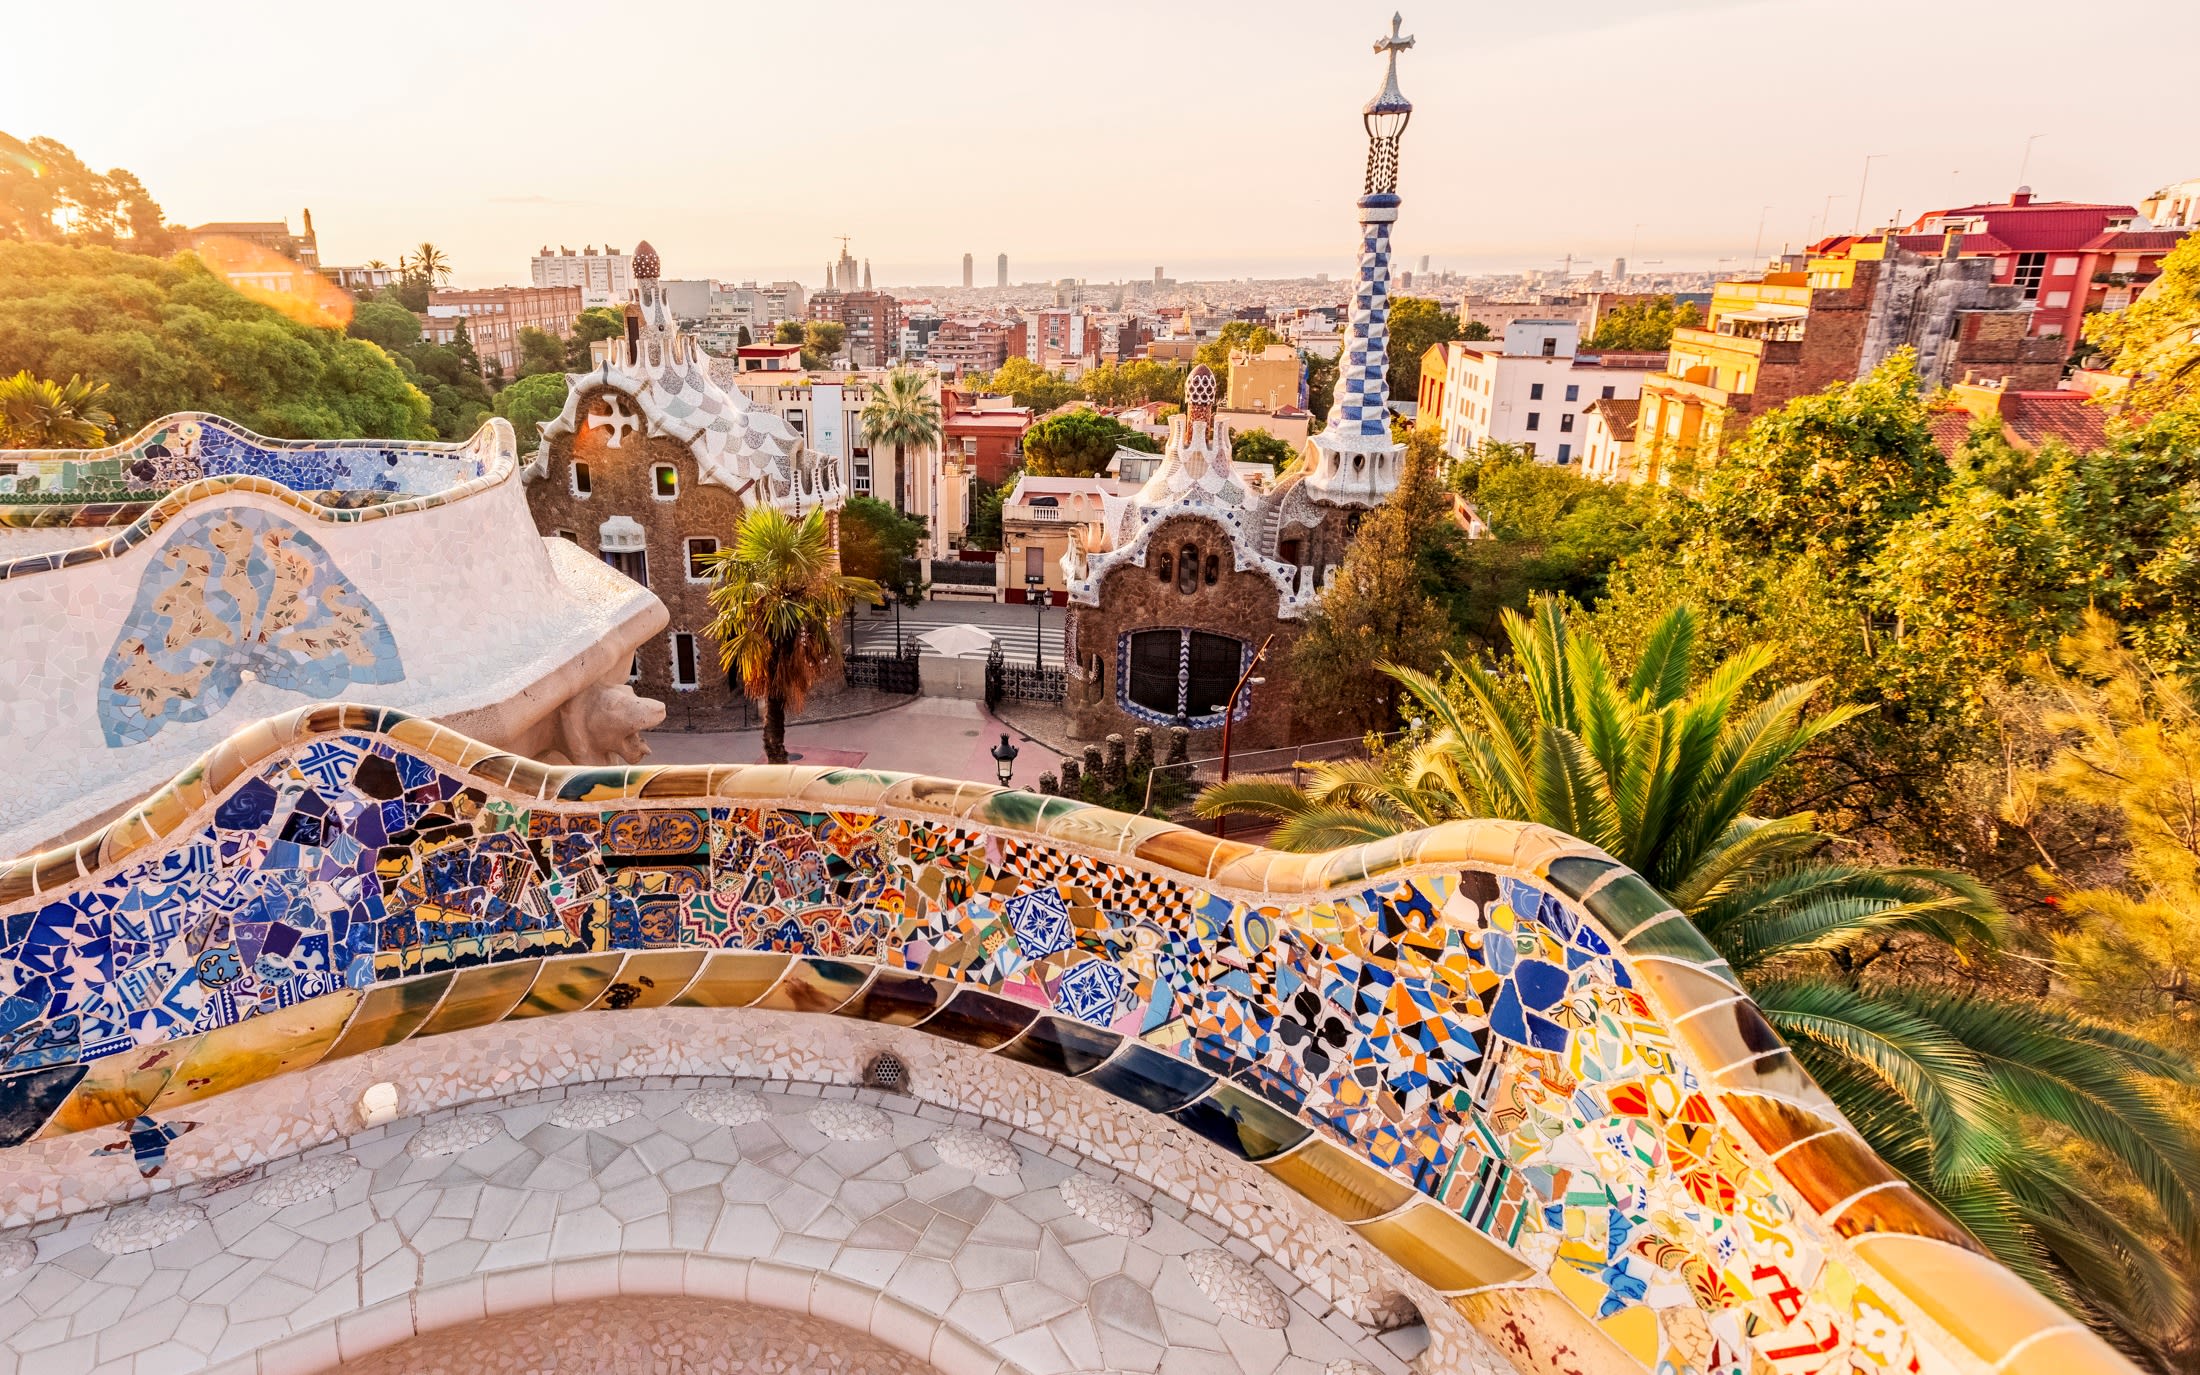 Photograph from a viewing platform in Park Güell in Barcelona.